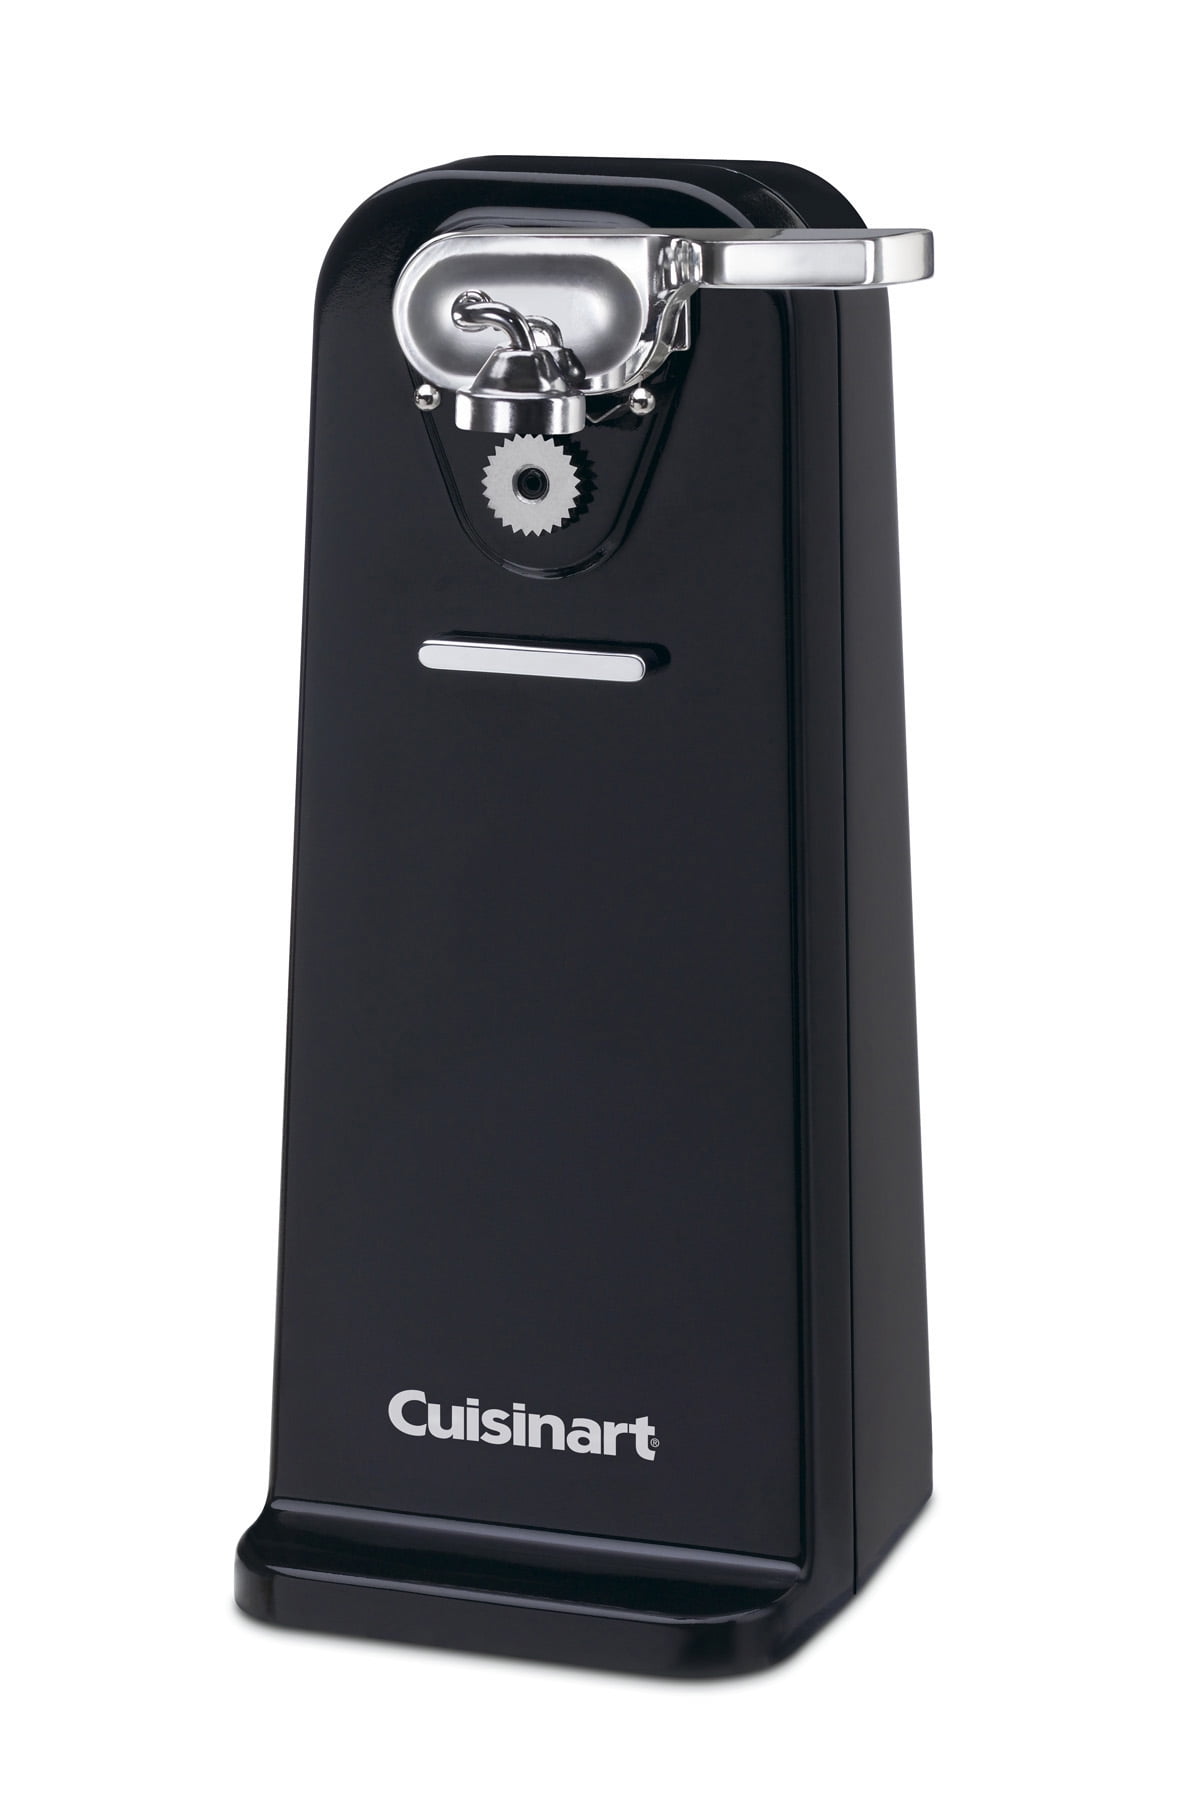 Black Black & Swing-A-Way 407BK Portable Can Opener Cuisinart CCO-50BKN Deluxe Electric Can Opener